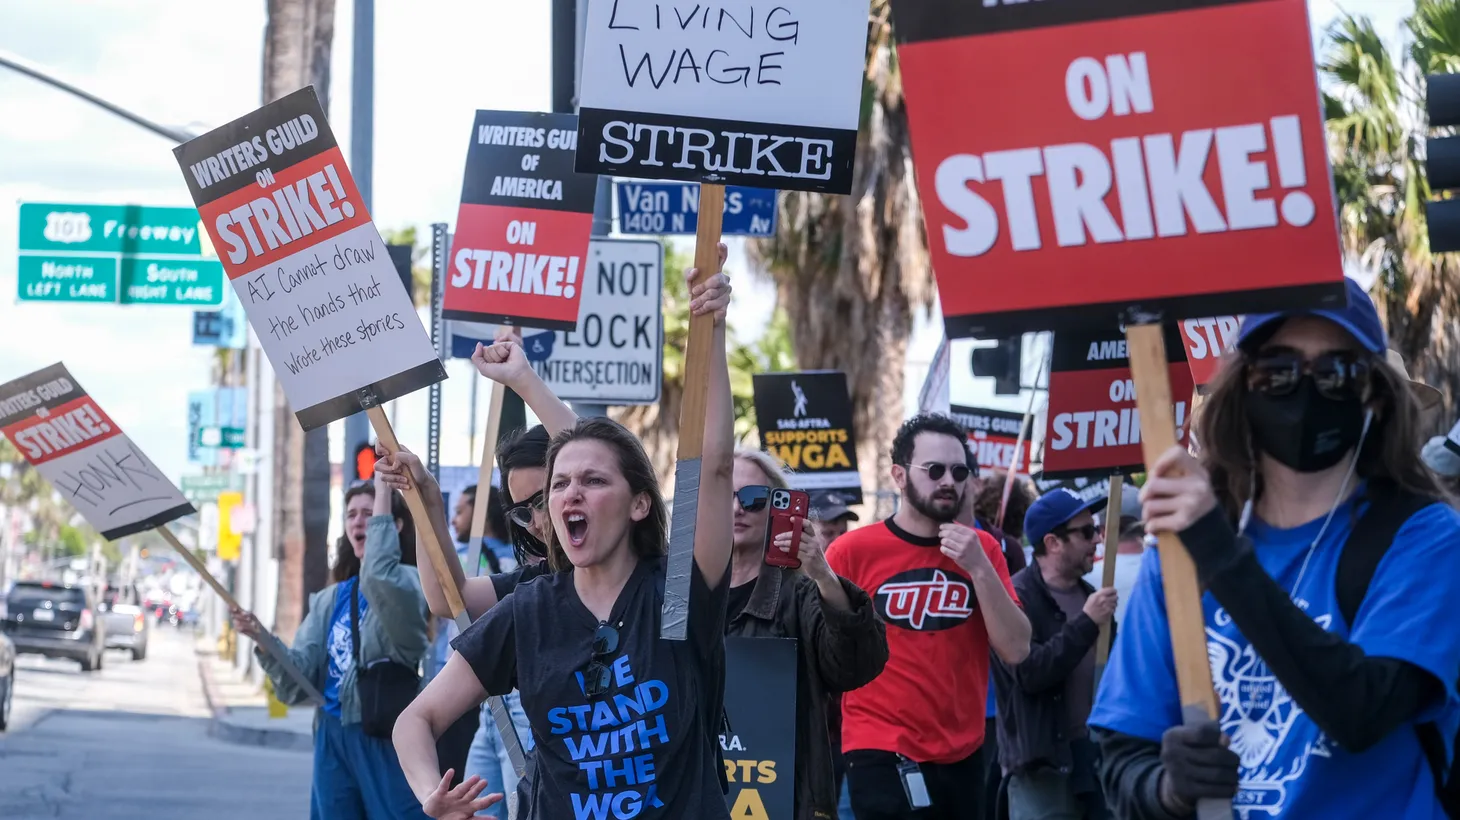 Members of the The Writers Guild of America picket outside the Netflix, Inc., building on Sunset Blvd in Los Angeles, on Friday, May 5, 2023.